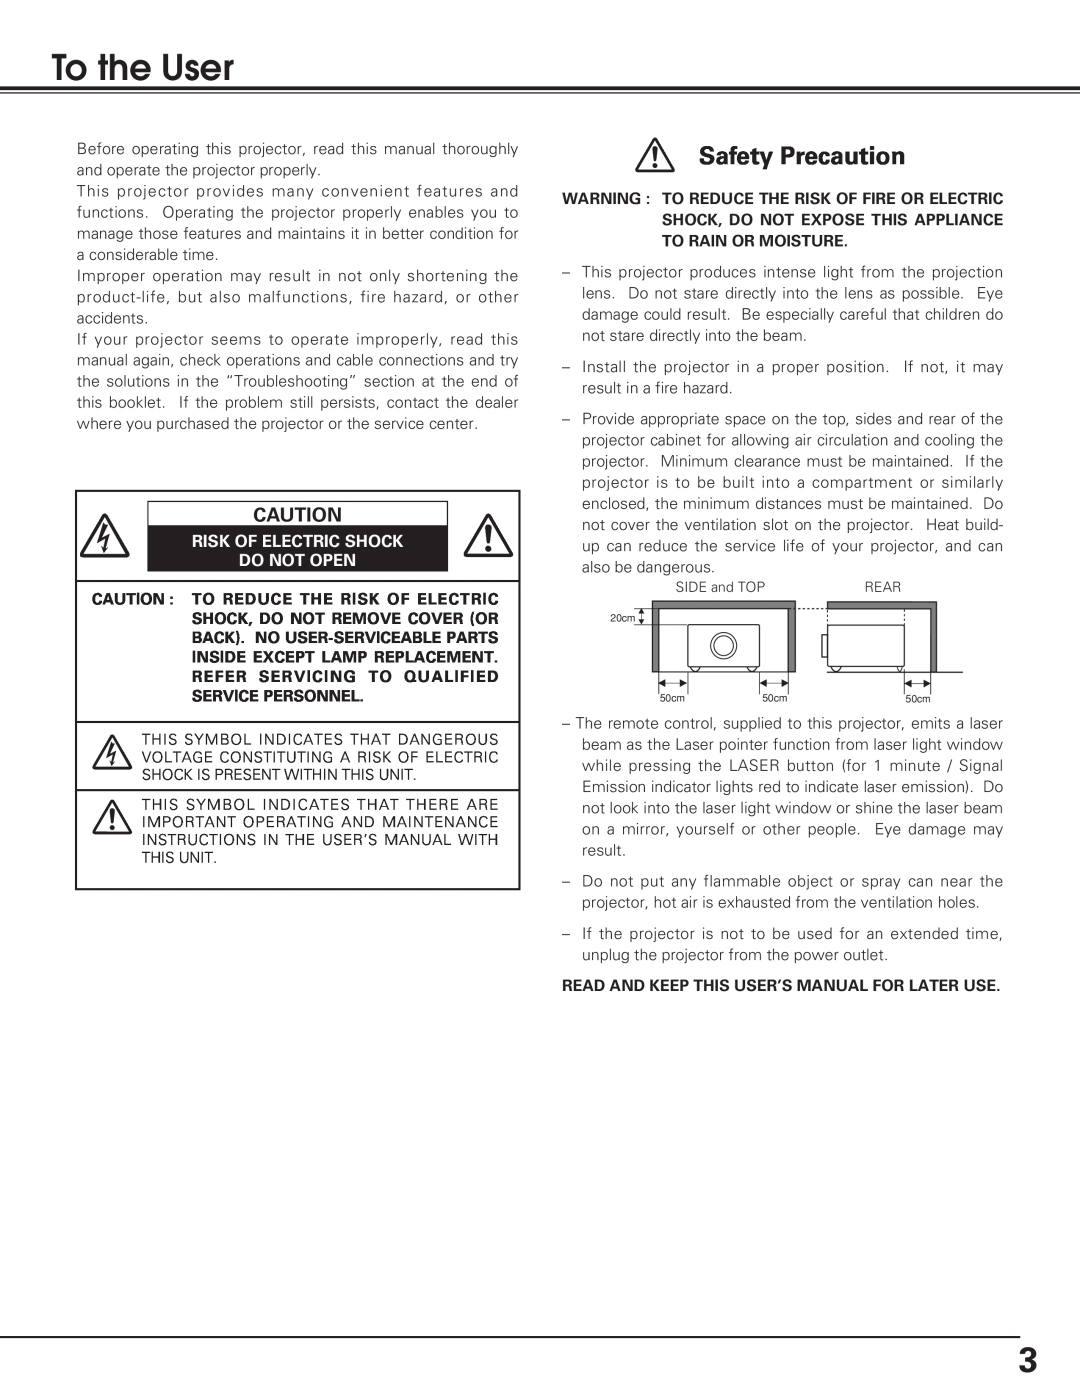 Christie Digital Systems 38-VIV208-01 user manual To the User, Safety Precaution, Risk Of Electric Shock Do Not Open 